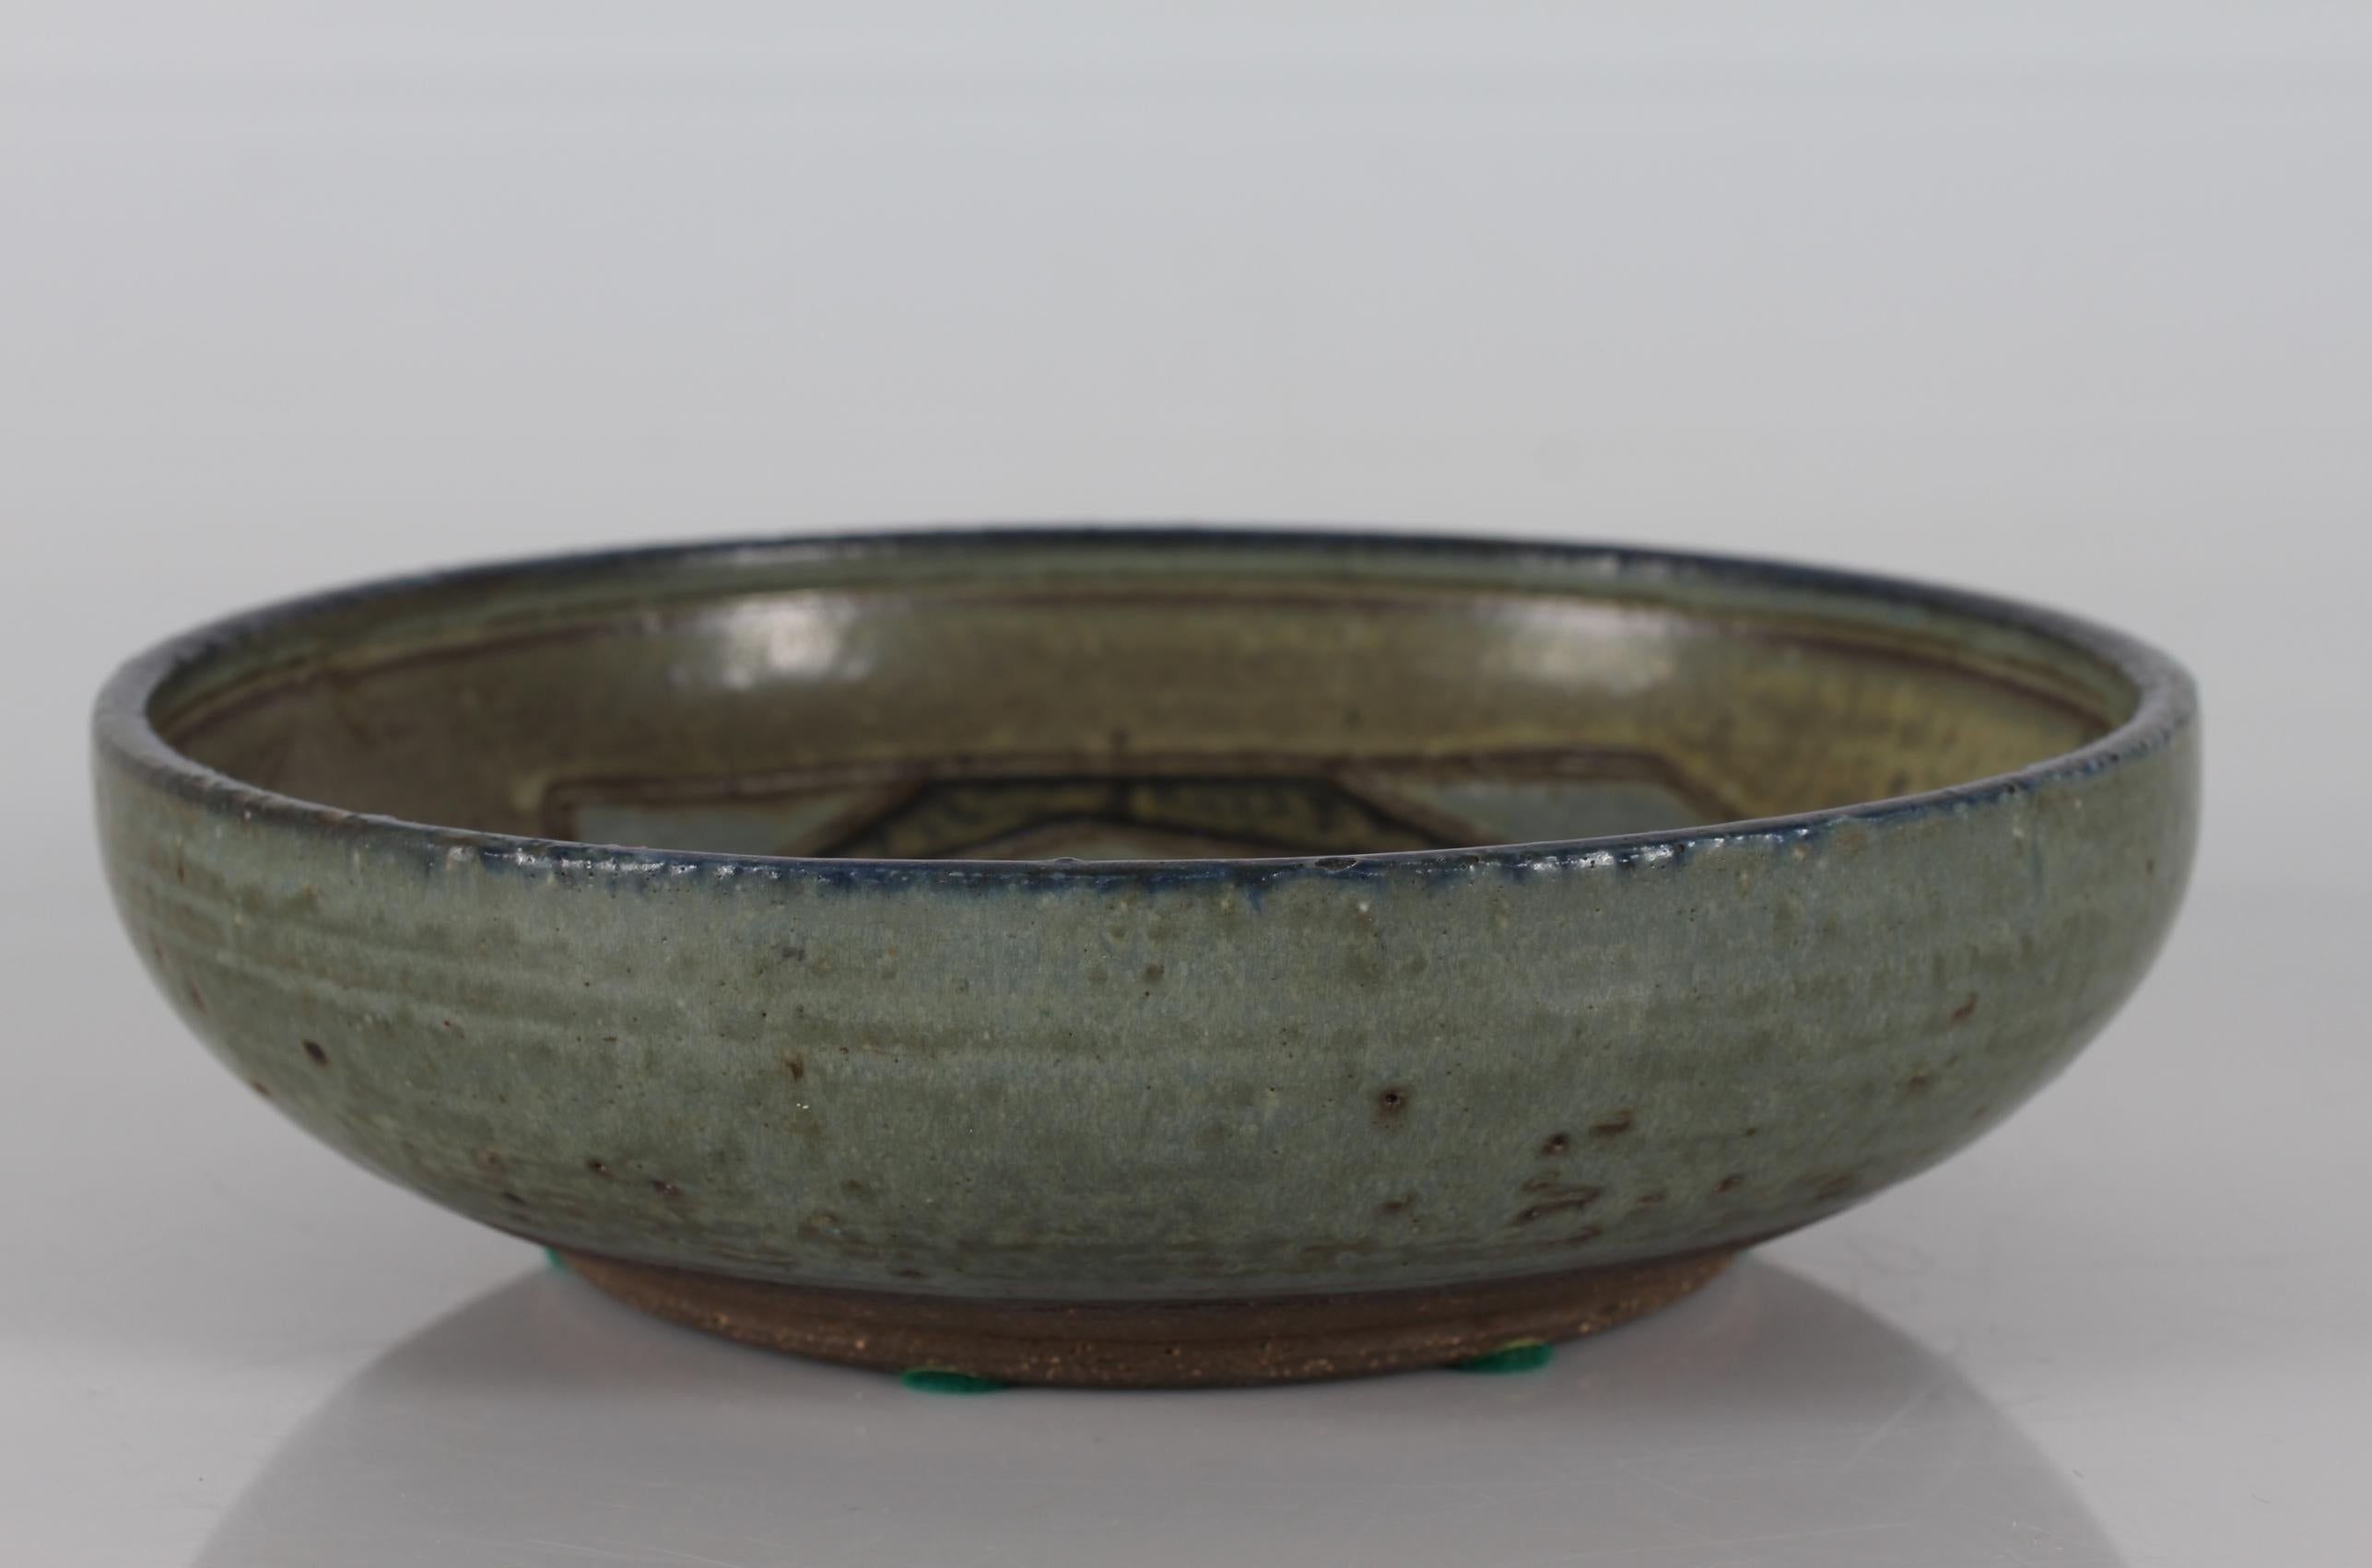 Round stoneware bowl with bird motif designed by Danish ceramist Jørgen Mogensen and manufactured by Royal Copenhagen in Denmark:
The bowl has a grey, blue and brown glaze and is signed with 3 waves for Royal Copenhagen and the monogram JM for